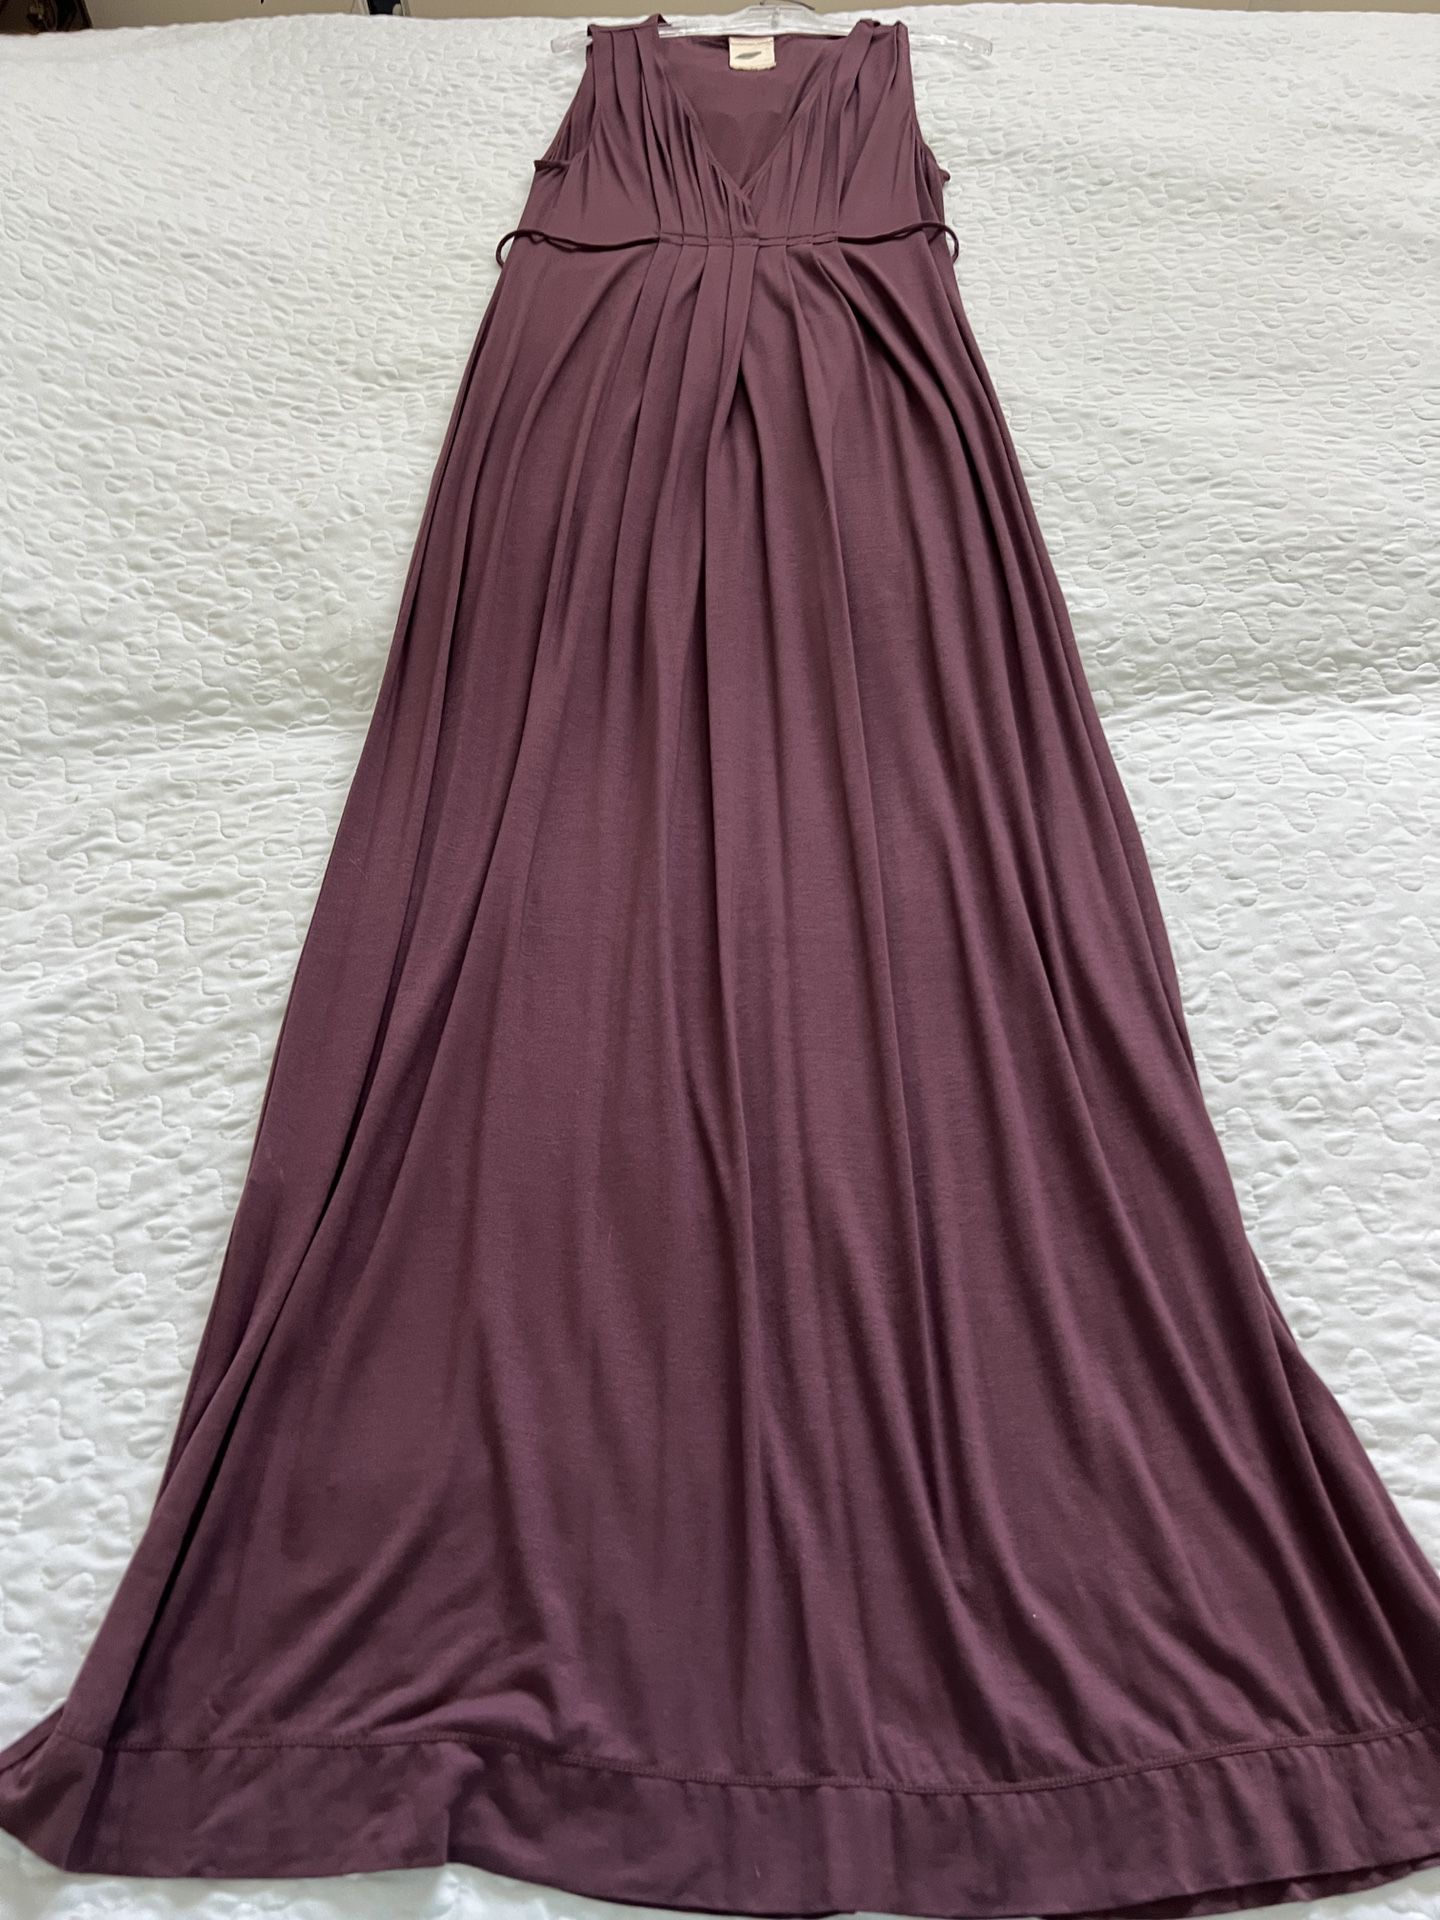 Lightweight Soft And Comfortable Prom Dress (Possible Maternity)